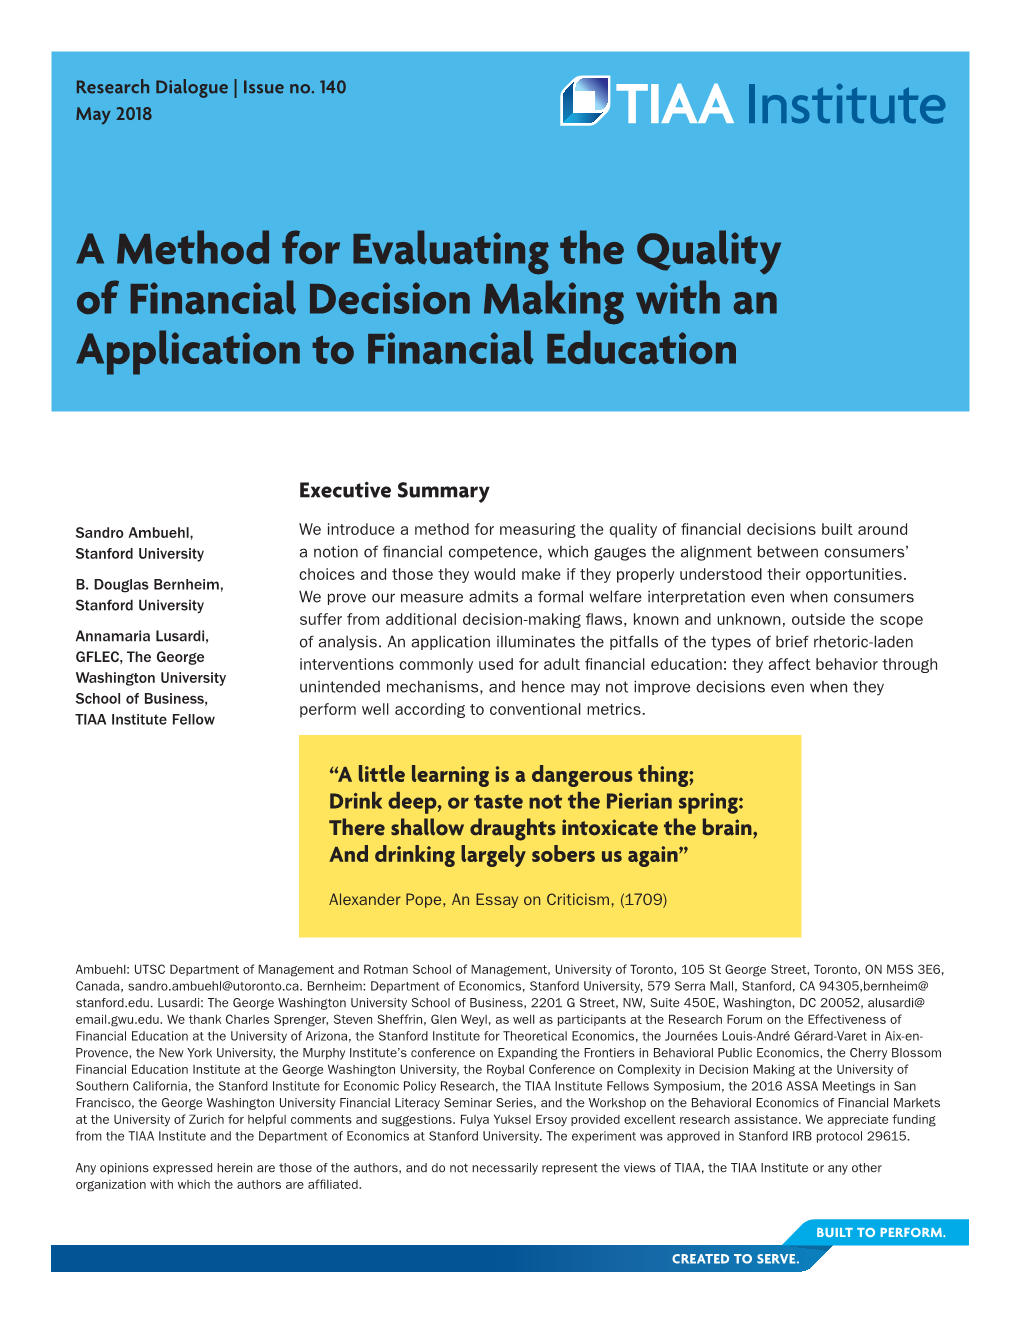 A Method for Evaluating the Quality of Financial Decision Making with an Application to Financial Education